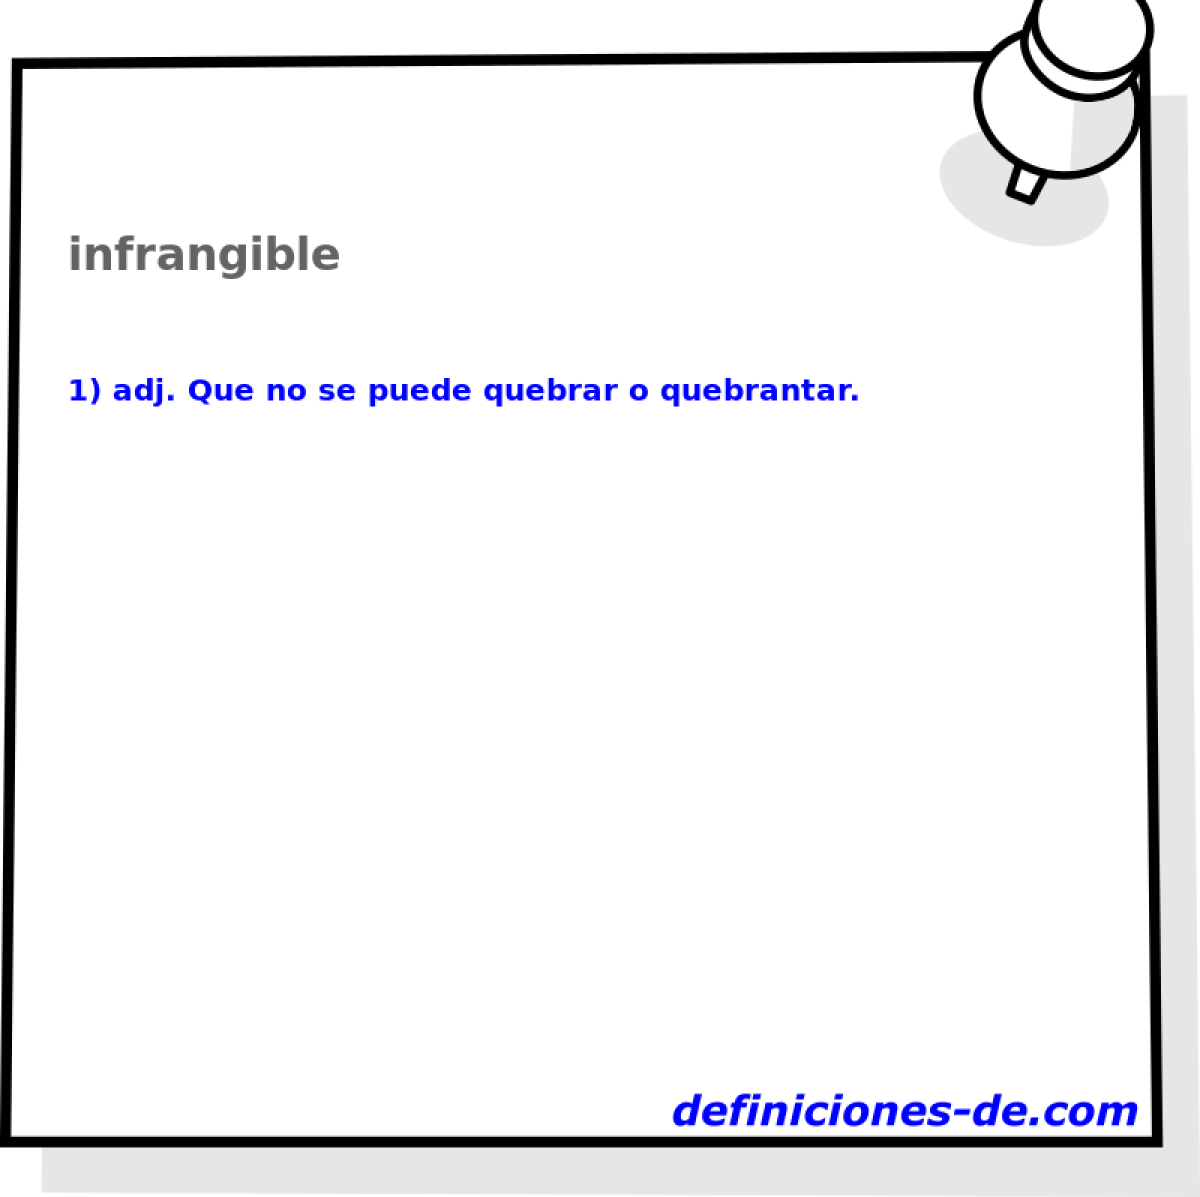 infrangible 